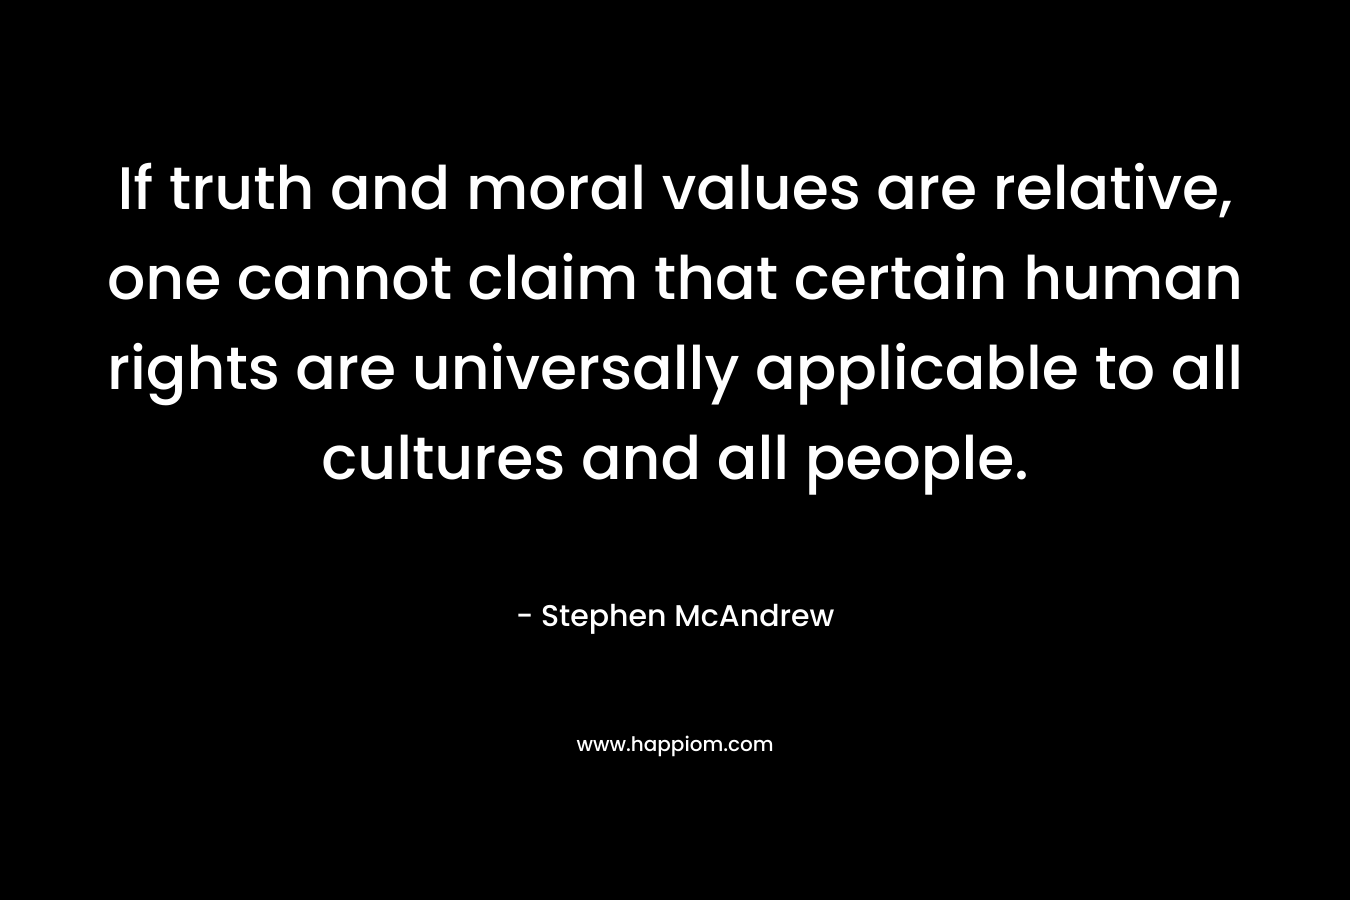 If truth and moral values are relative, one cannot claim that certain human rights are universally applicable to all cultures and all people. – Stephen McAndrew